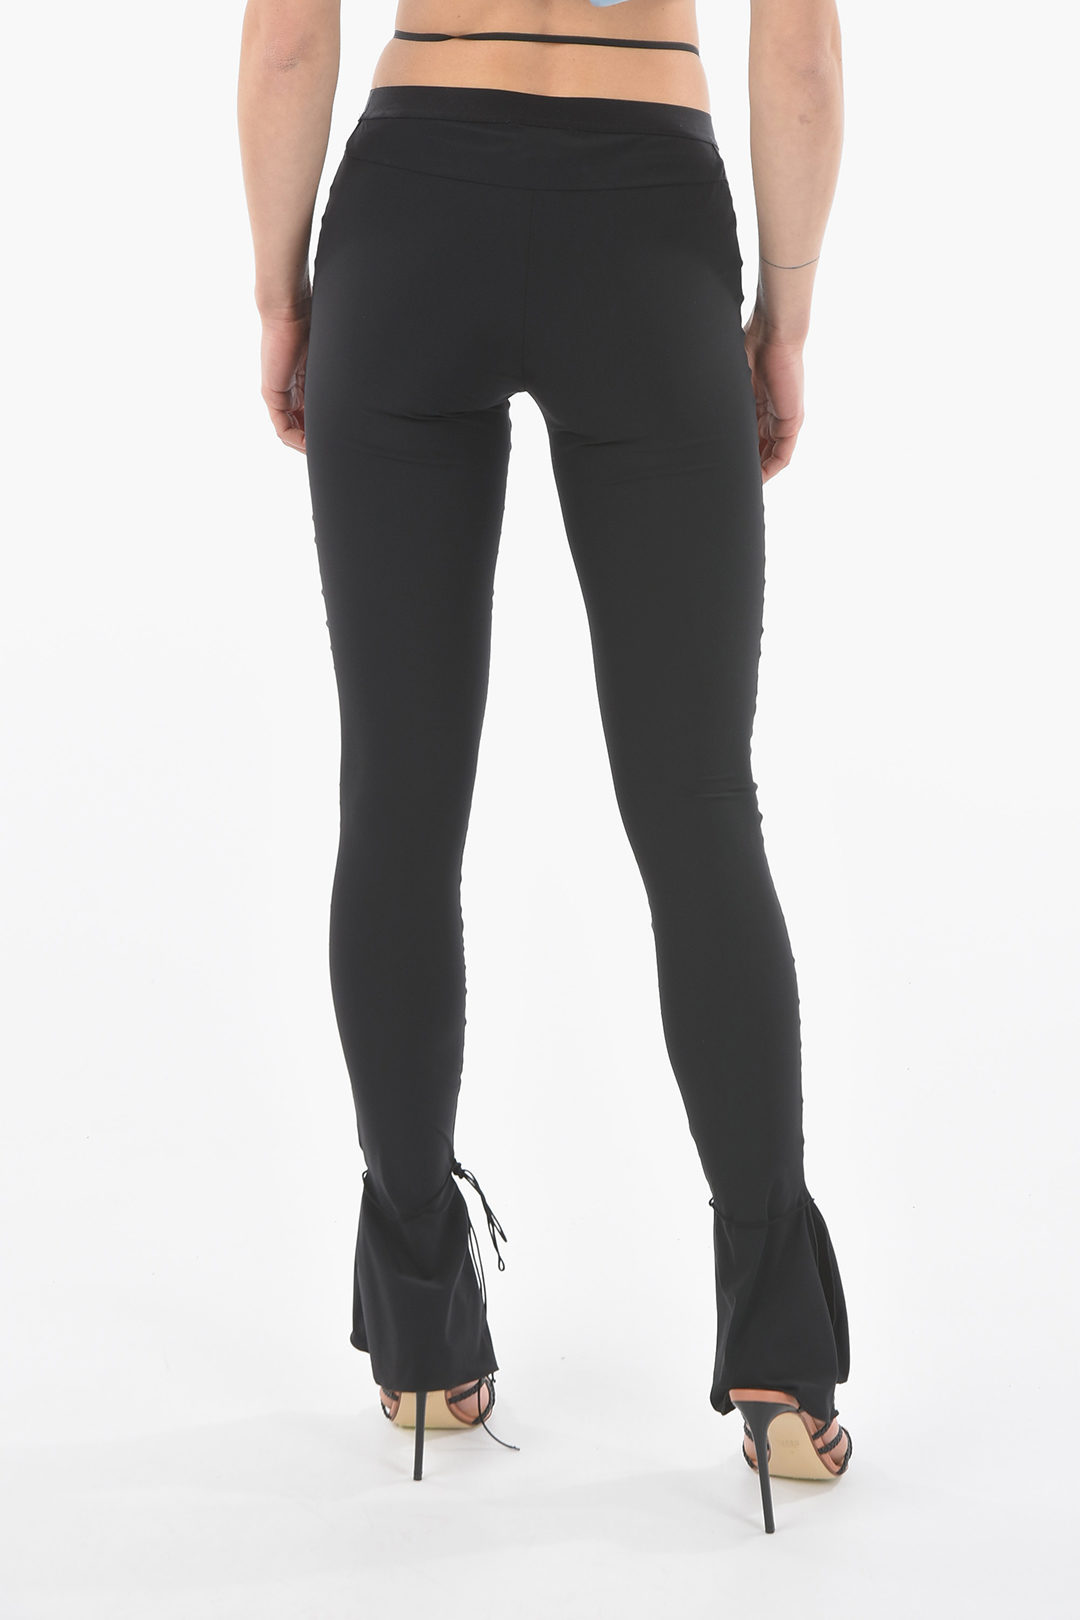 Boot Cut Bodycon Leggings with Split on the Ankle